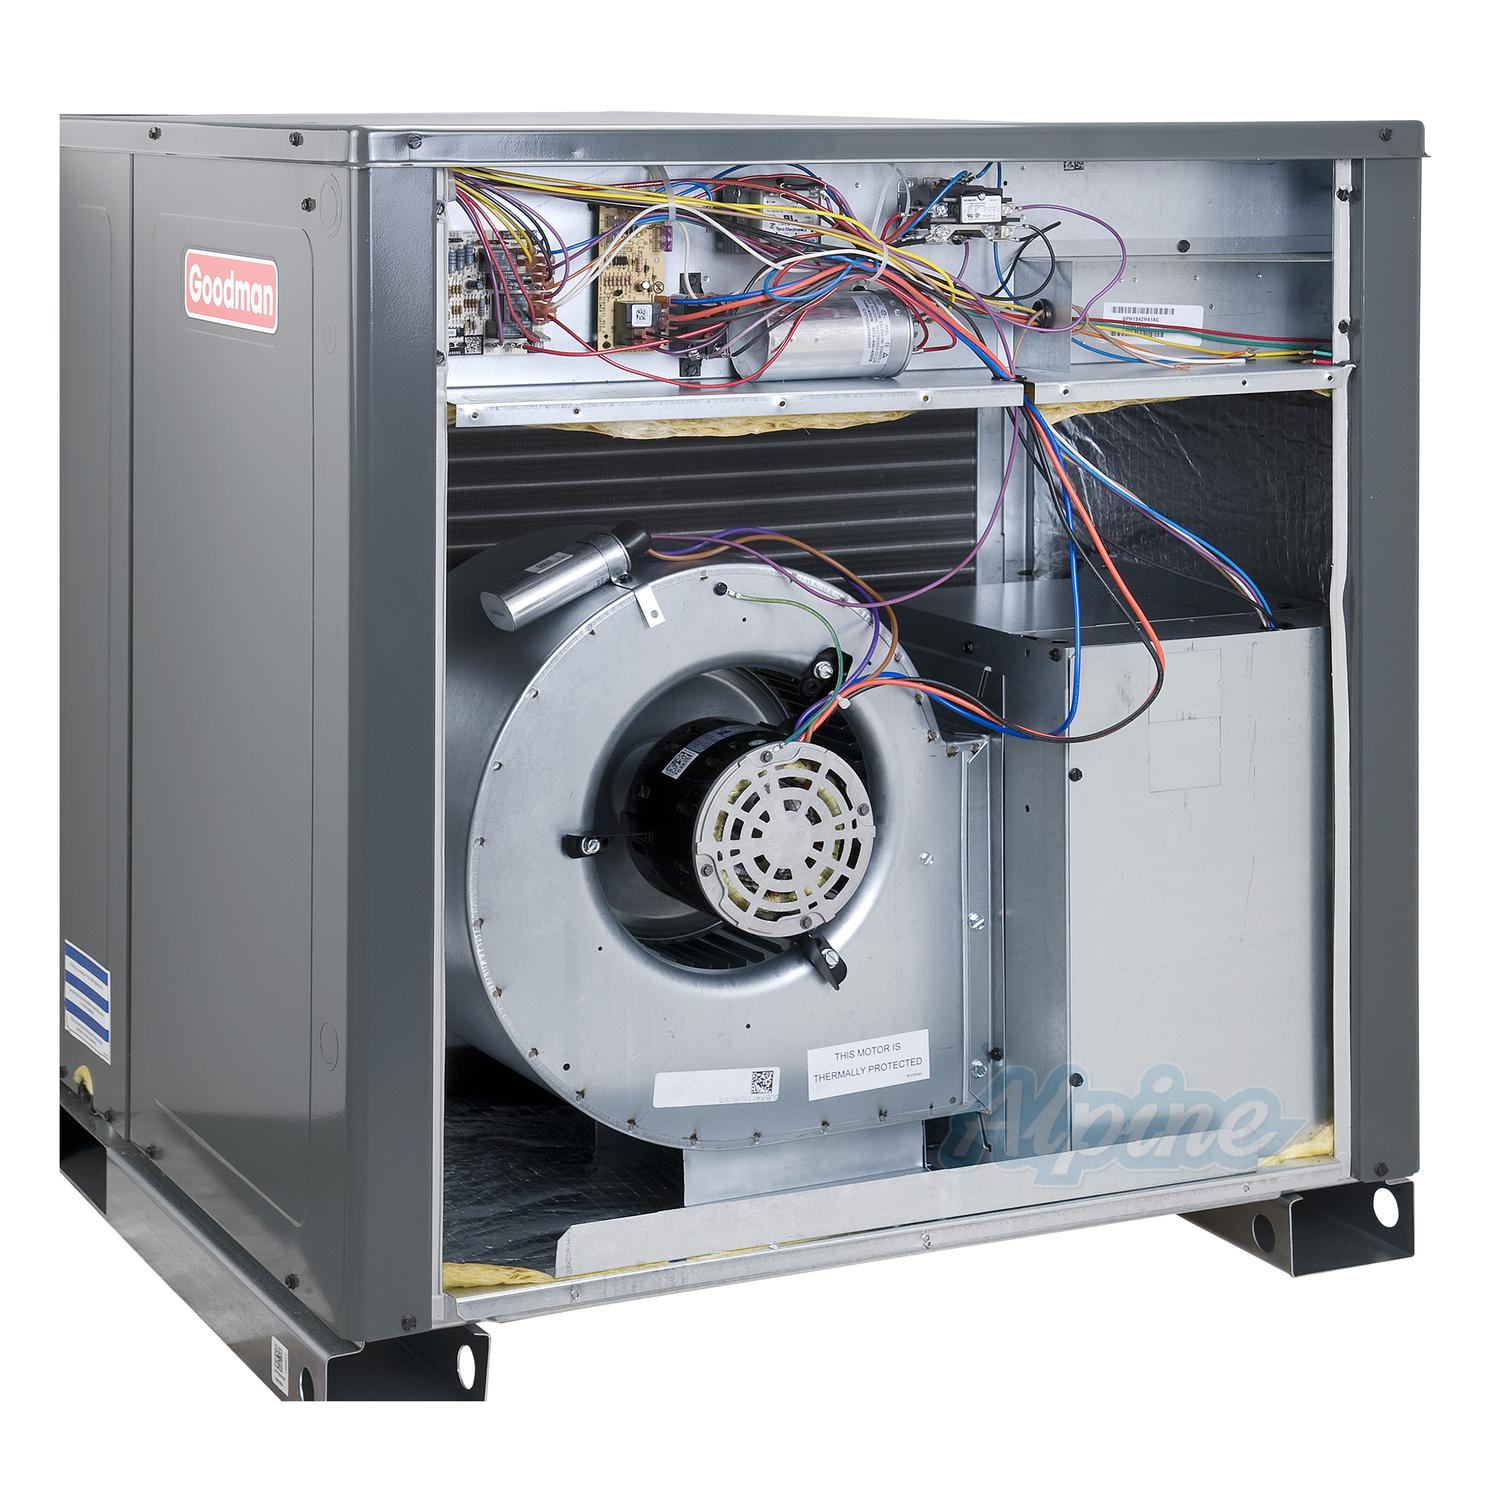 goodman-gpc1430h41-2-5-ton-14-seer-self-contained-packaged-air